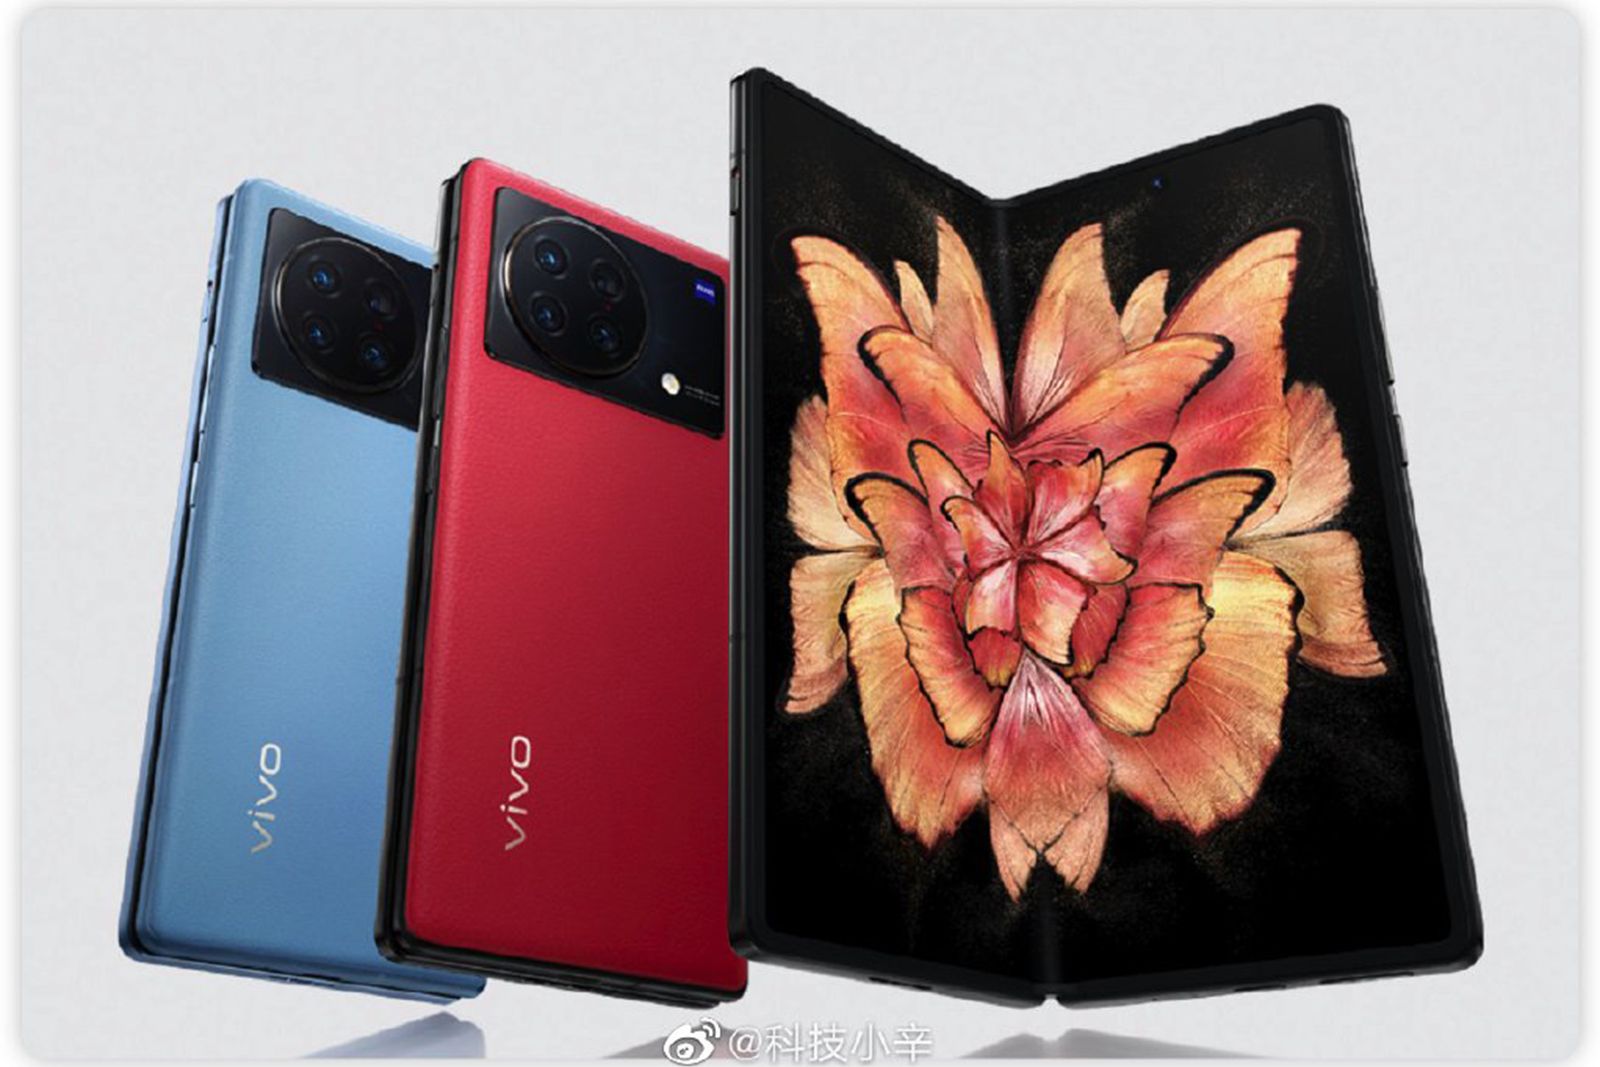 Vivo X Fold Plus open and closed in red and blue